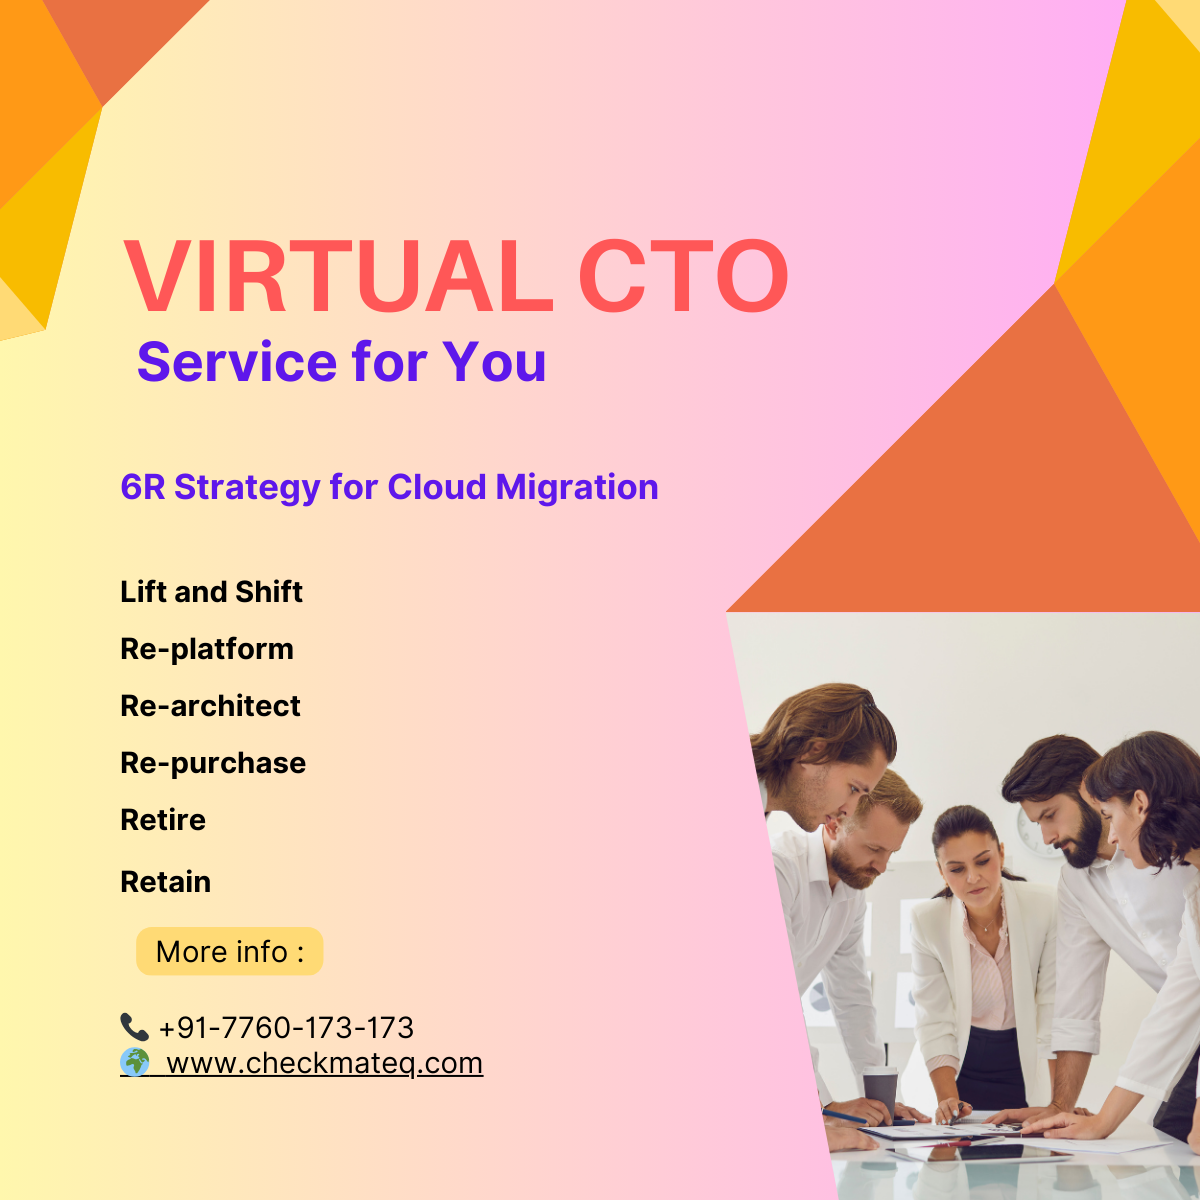  Virtual CTO Services for Technology Management